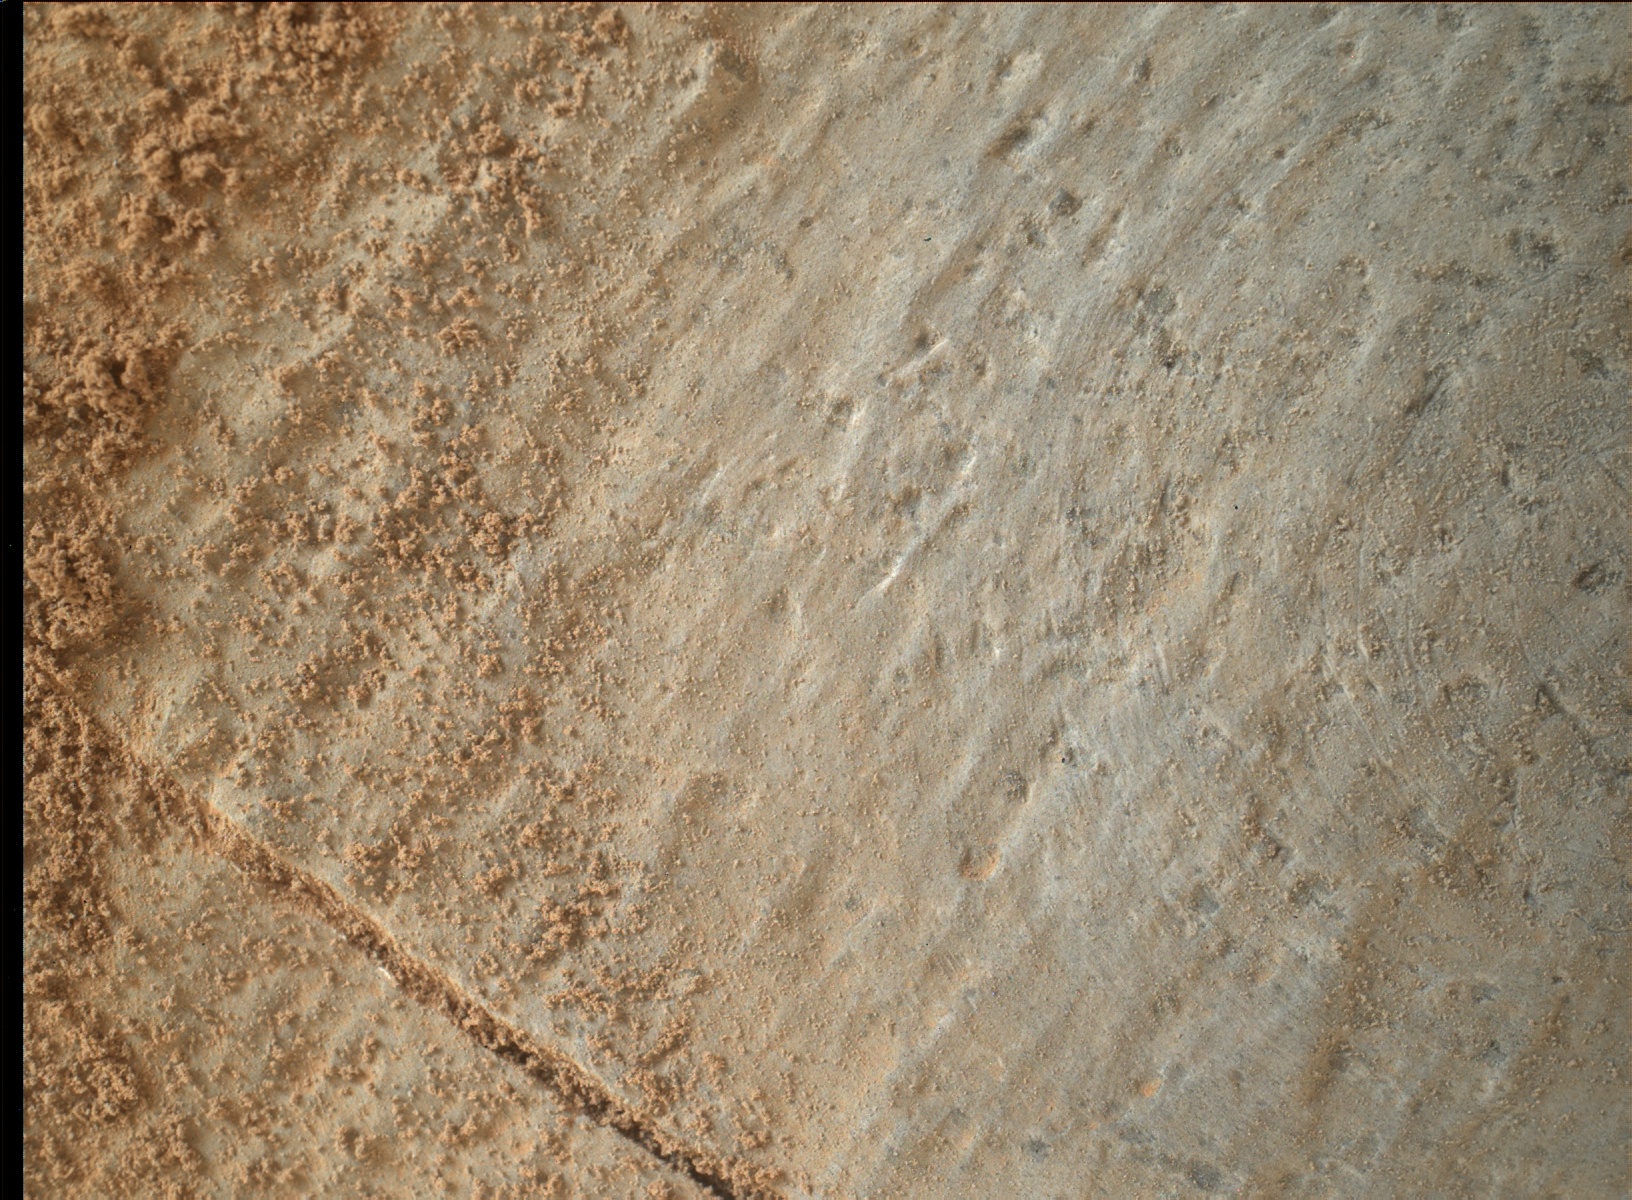 Nasa's Mars rover Curiosity acquired this image using its Mars Hand Lens Imager (MAHLI) on Sol 815